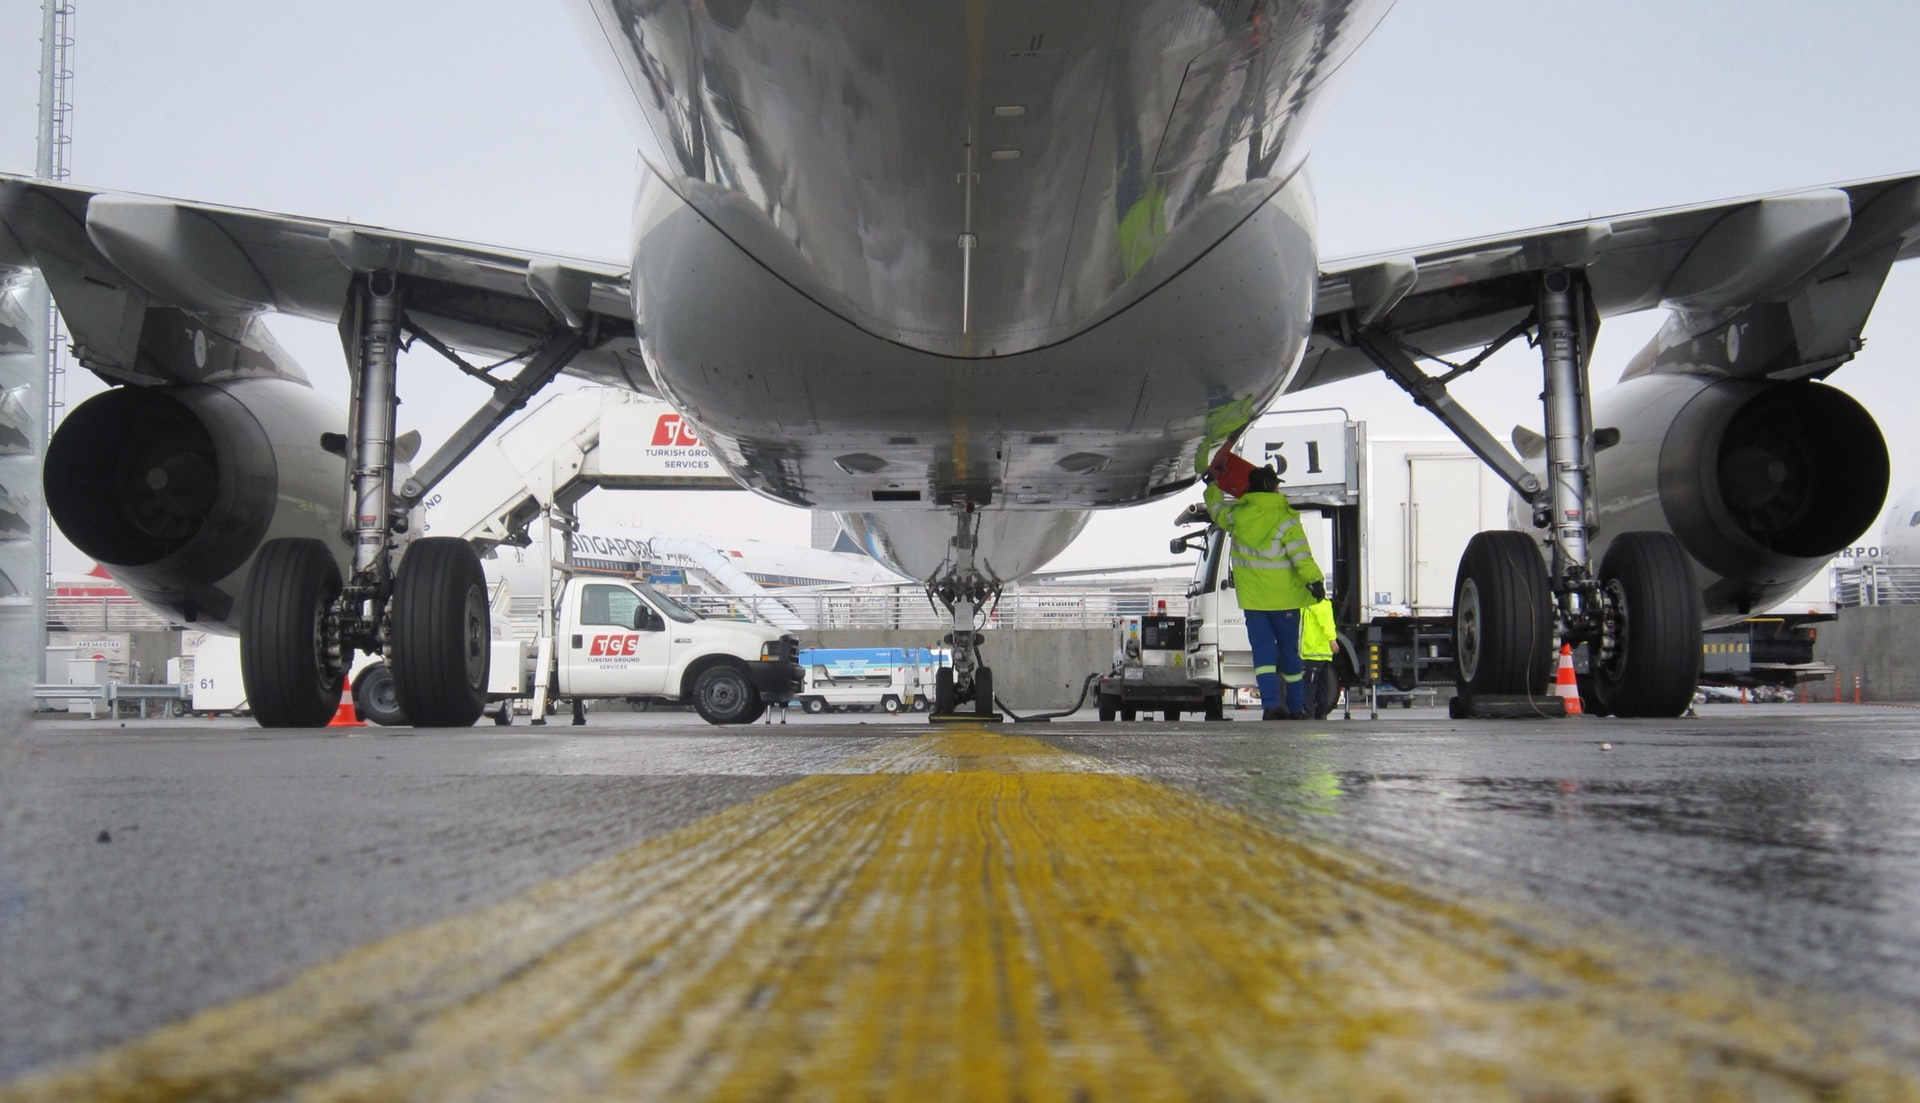 Engineers performing aircraft line maintenance on an airplane stationed outdoors.